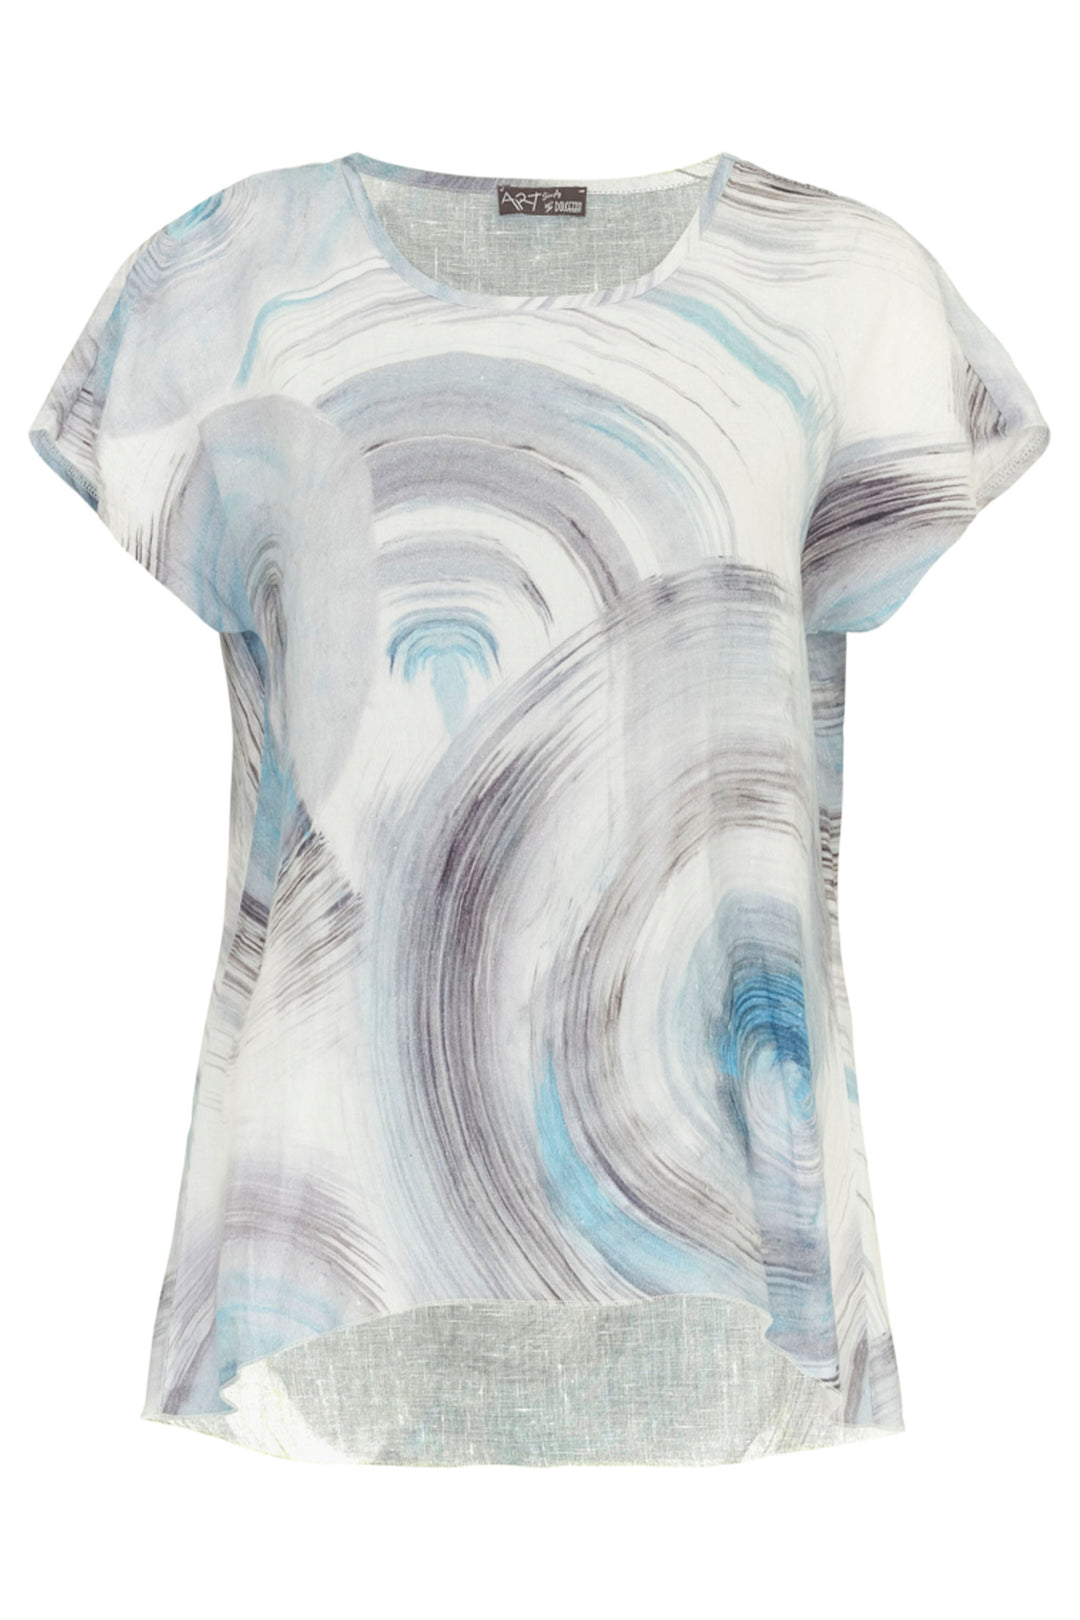 Dolcezza Spring 2024 The cool ocean abstract print adds a touch of artistic flair while the cap sleeves and high-low curved hemline create a flattering silhouette. 